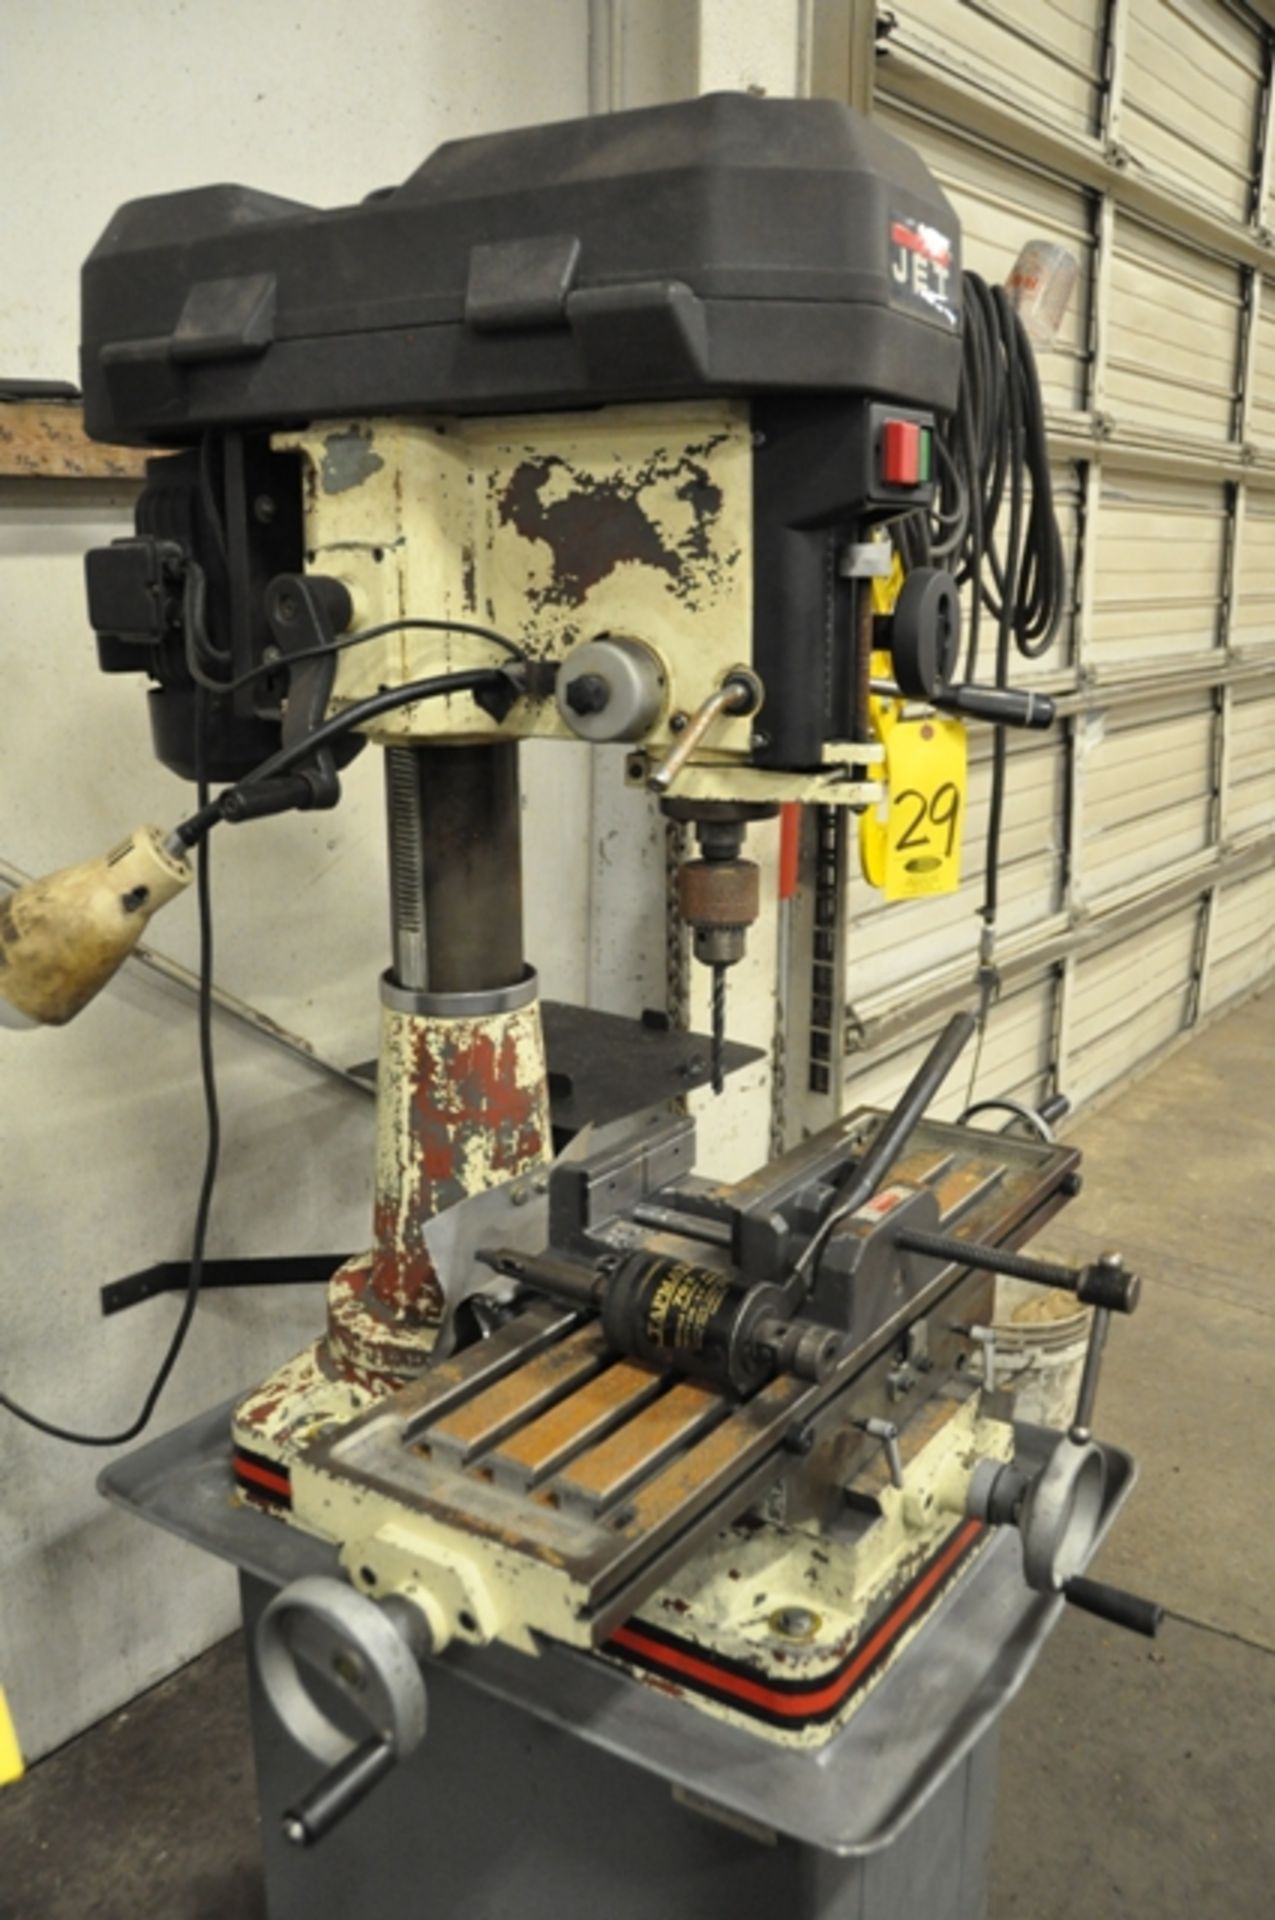 JET BENCH MILL ON WILTON CABINET BASE, HAND FEED, STEP PULLEY SPEEDS, 150 TO 3000 RPM, MORSE TAPER - Image 3 of 5